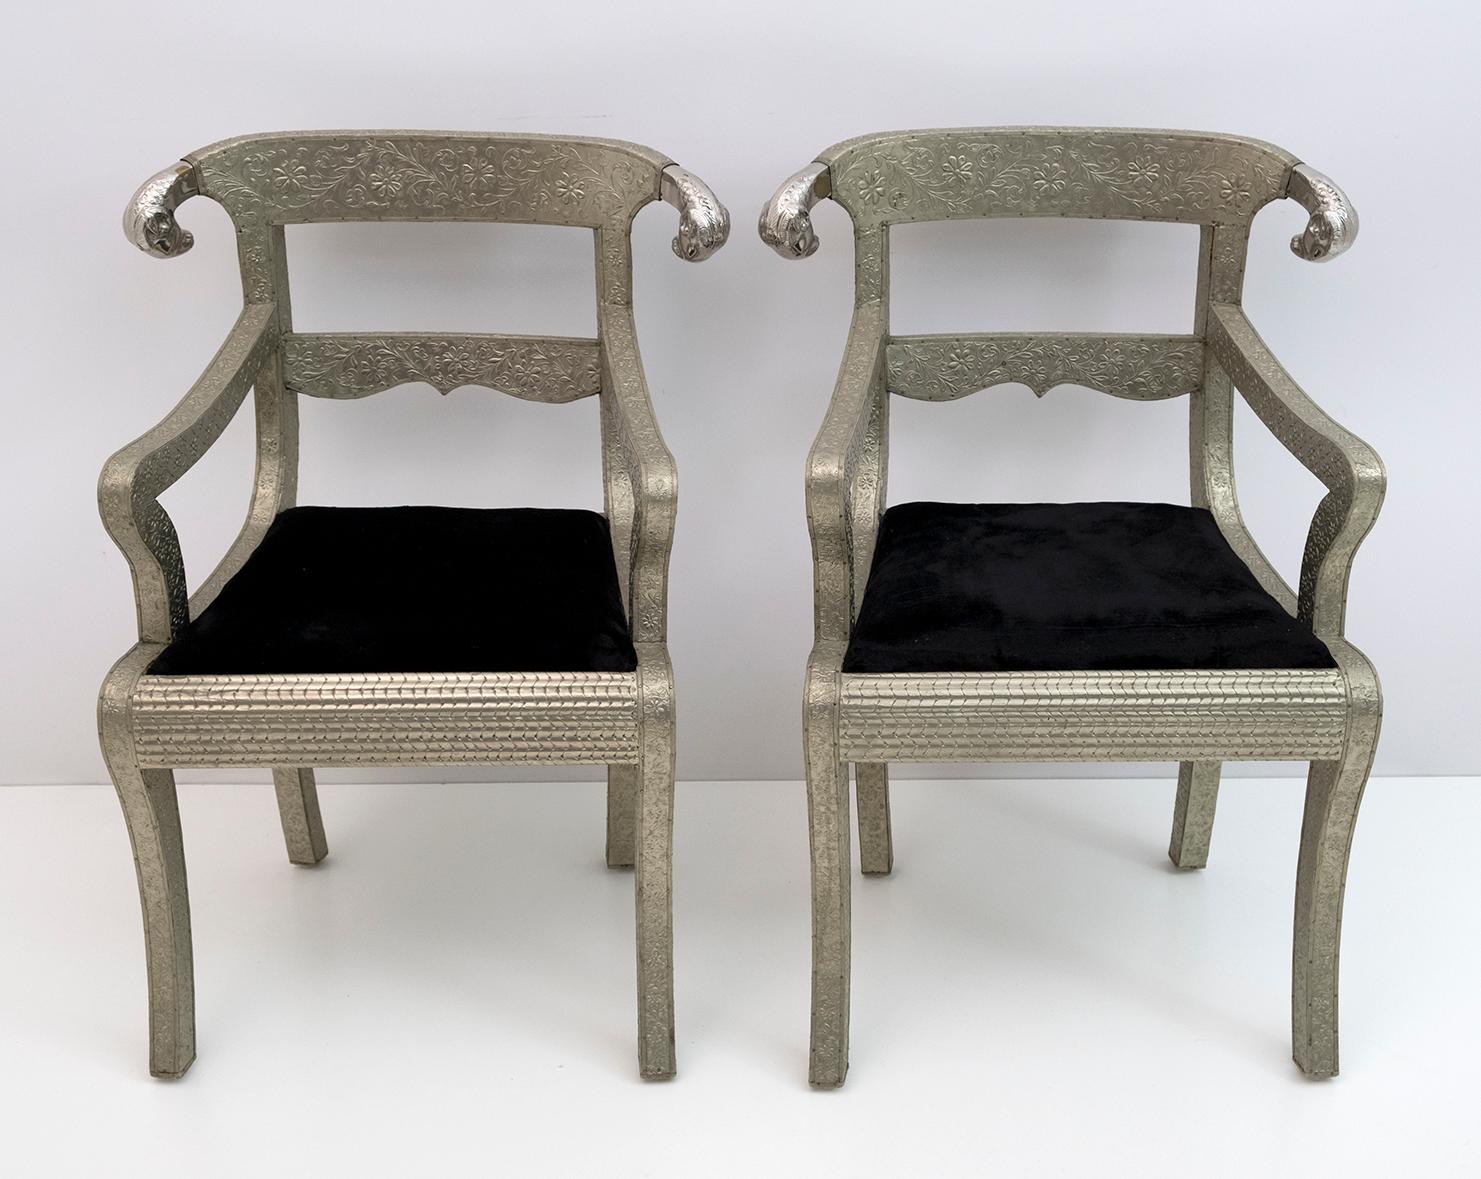 Set of two side chairs upholstered in Anglo-Indian silver.
Anglo Raj wedding palace chair, hand hammered with embossed silver metal work on wood with carved ram's head ends and black cushion, very beautiful and unusual.
Vintage Anglo-Indian